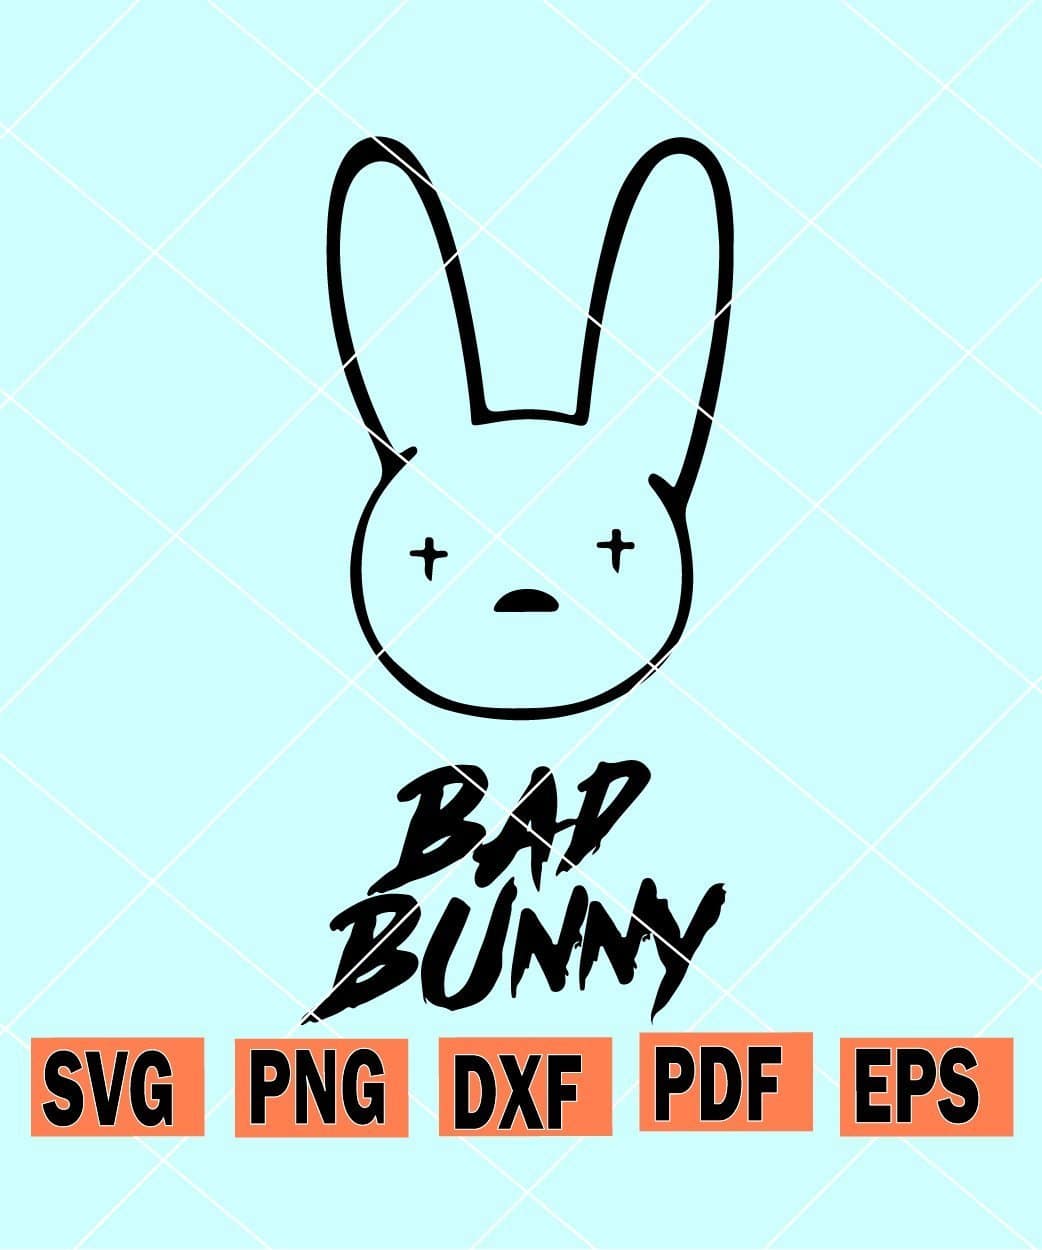 Download Free Svg Files For Bunnies - Free Bunny Rabbit Svg File ...